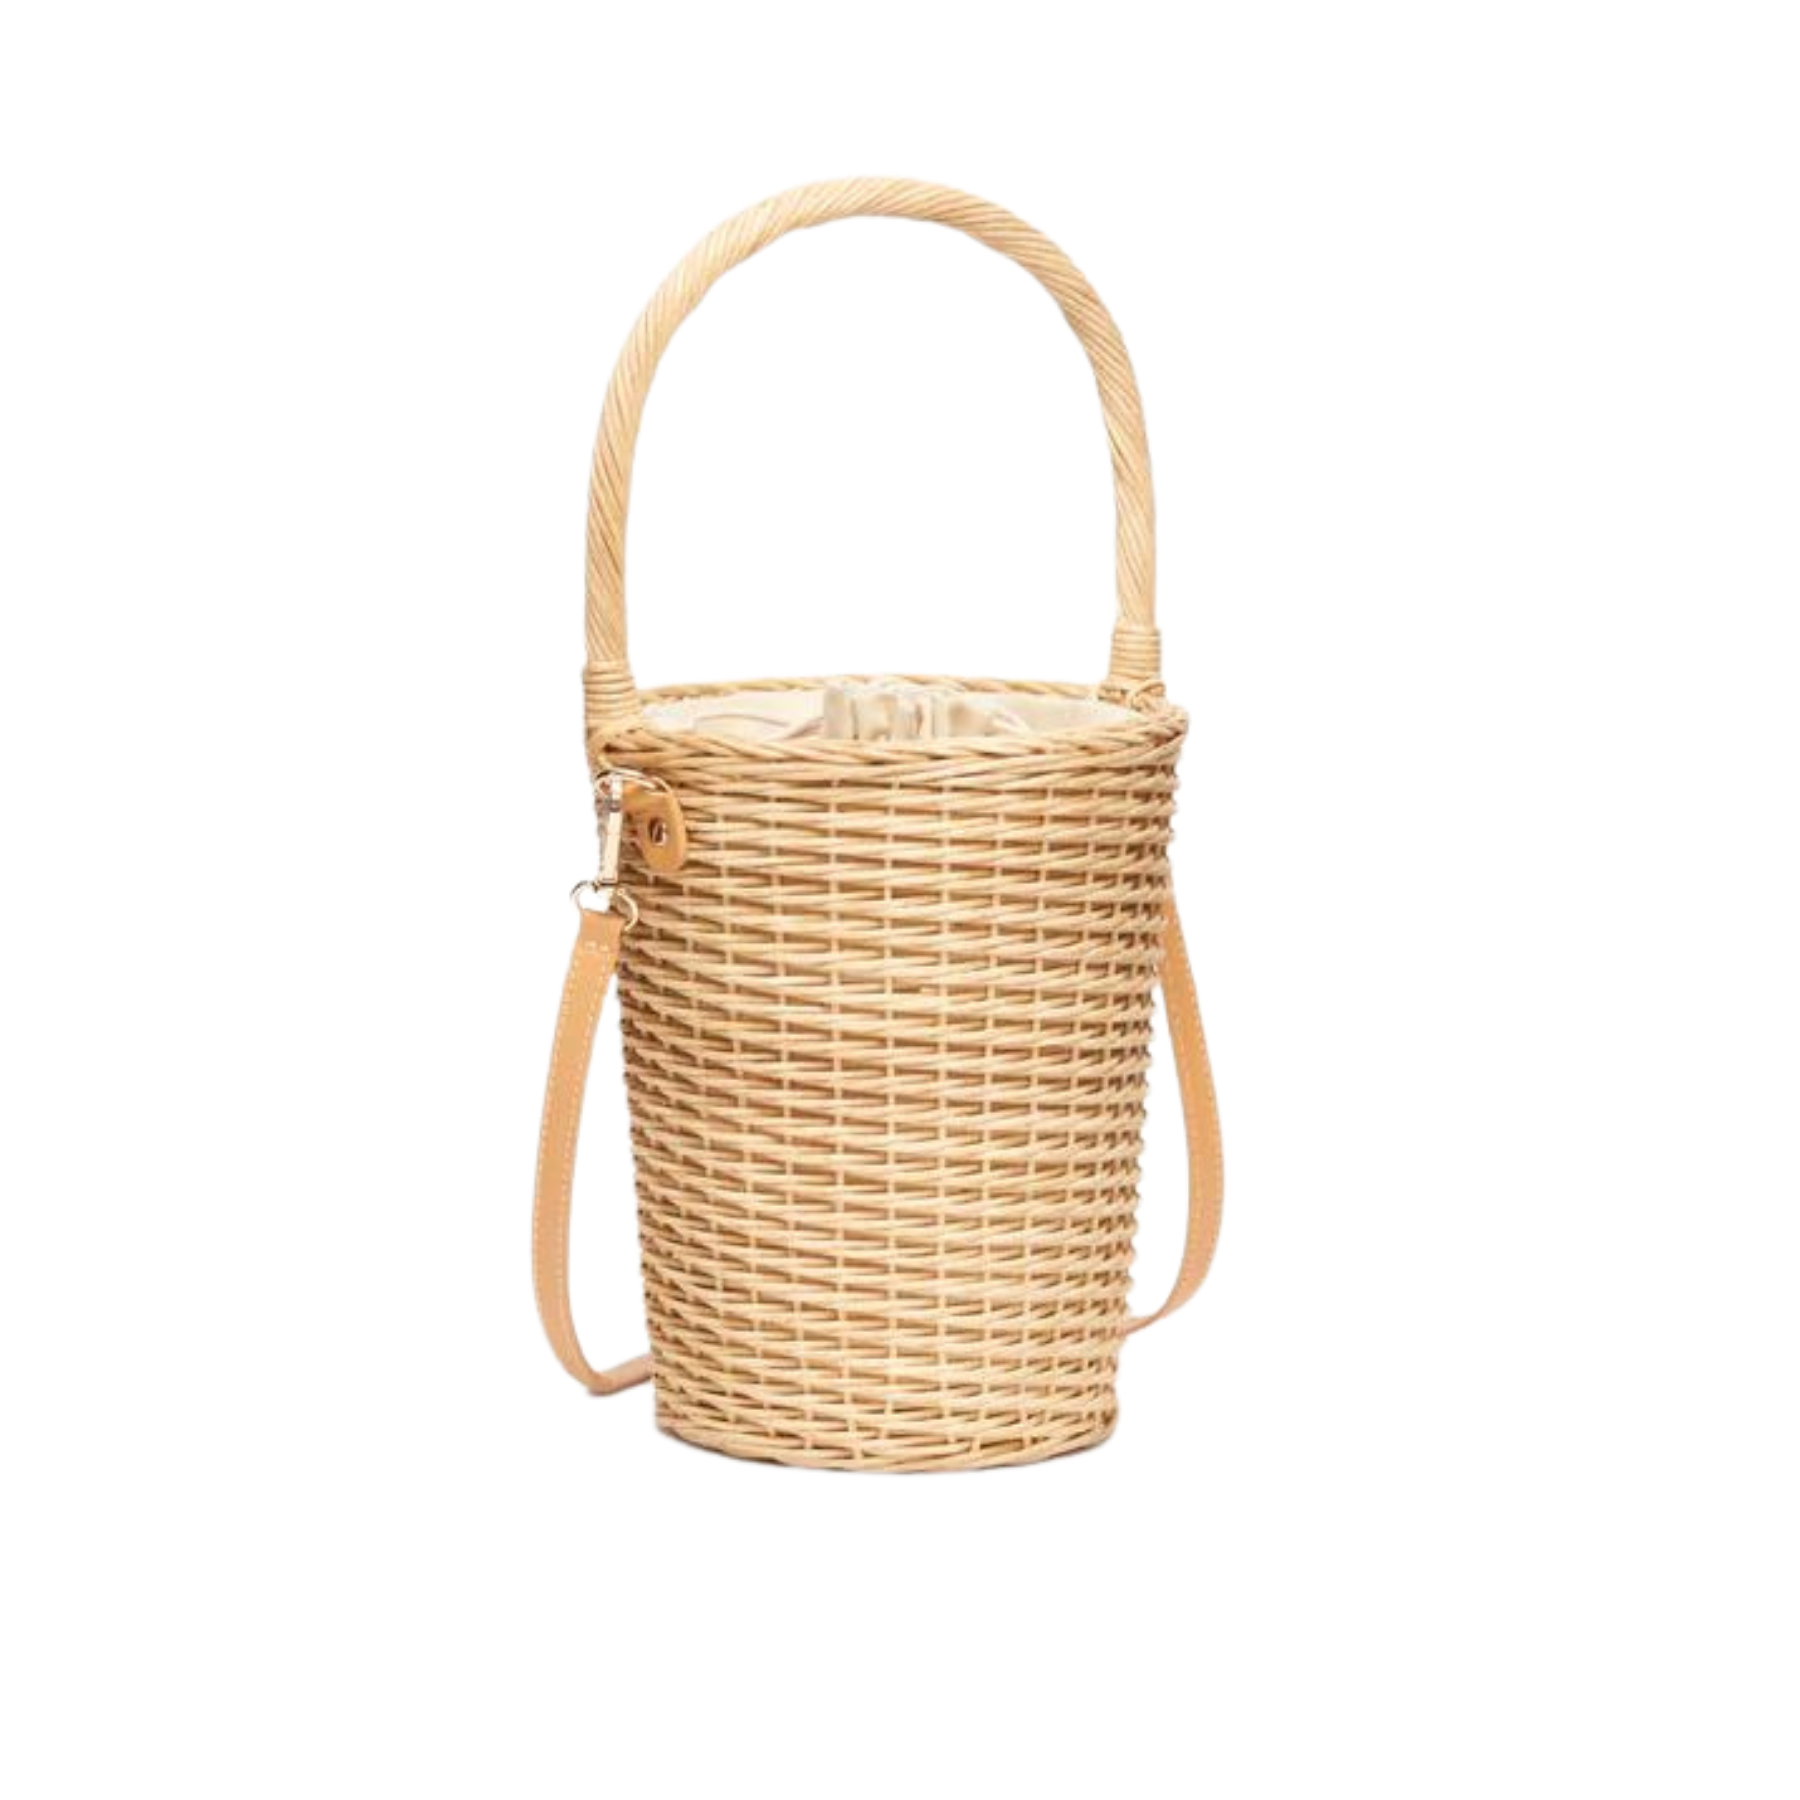 Tengba Fashion Womens Handheld Grass Woven Cute Straw Beach Bag Fashionable  Leisure Basket For Beach And Resort From Marcjacobsbags, $43.86 | DHgate.Com